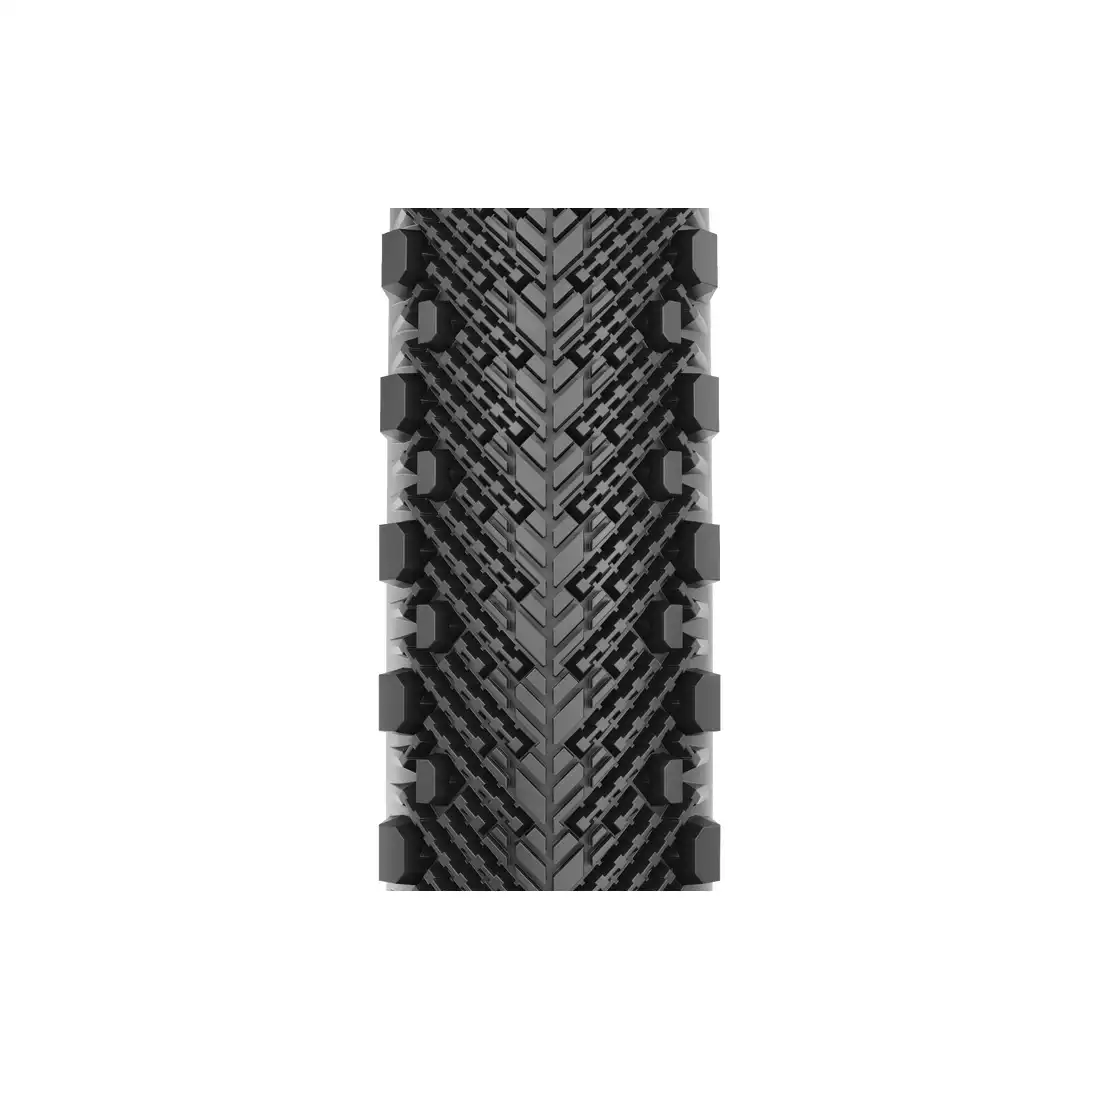 WTB VENTURE TCS Light Fast Rolling 120TPI Bicycle tire 700x50